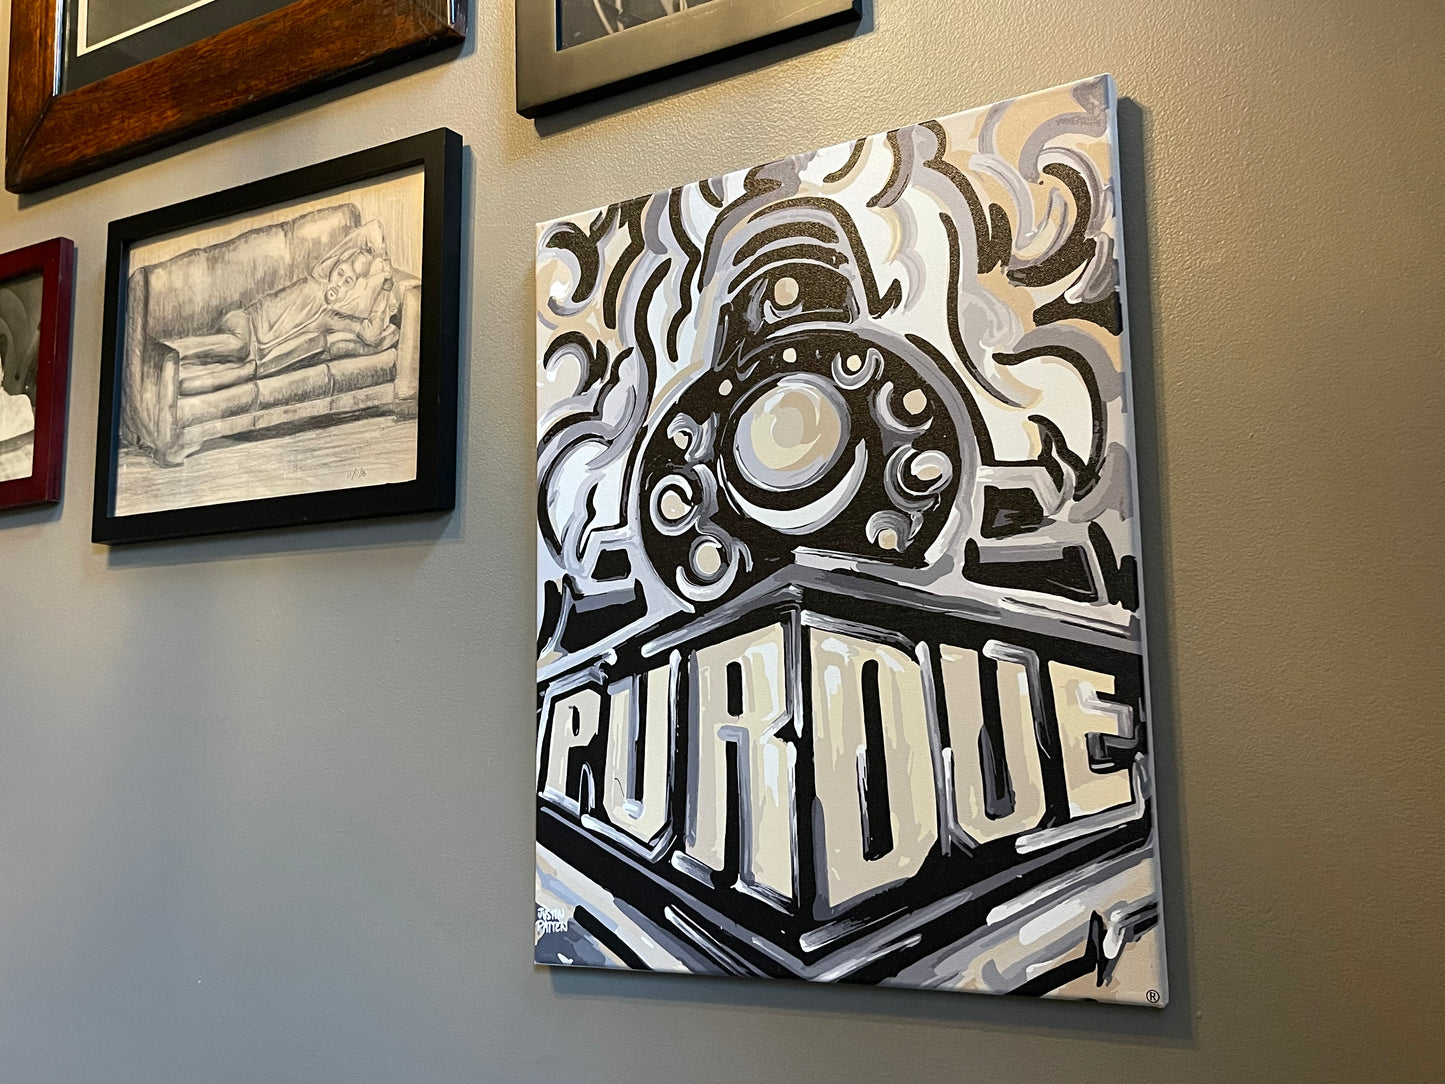 Purdue University 16" x 20" Boilermaker Special Wrapped Canvas Print by Justin Patten